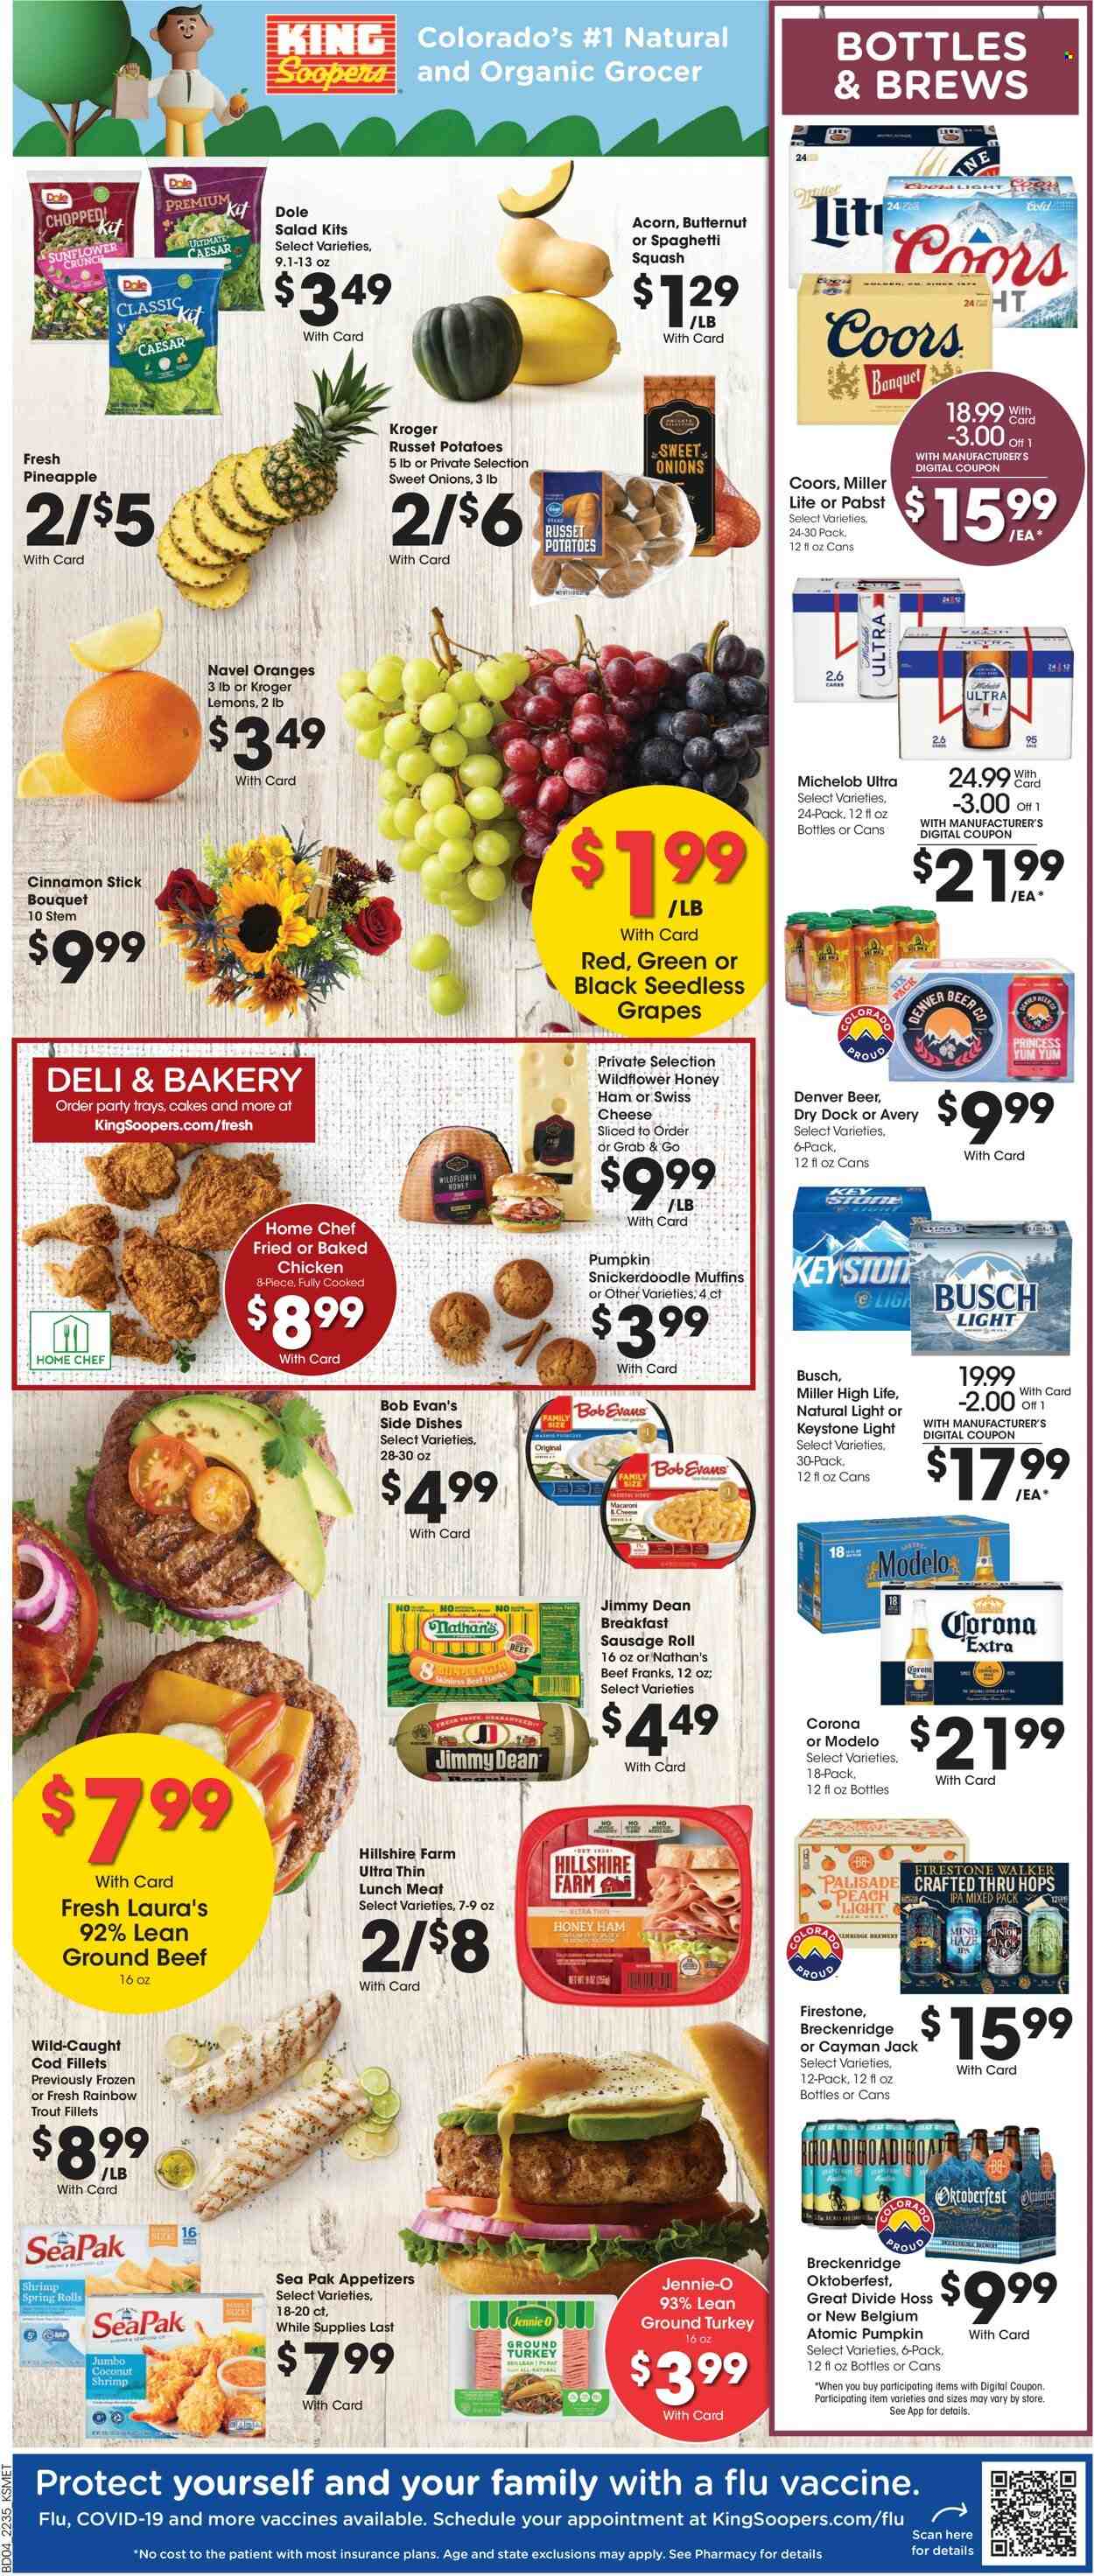 thumbnail - King Soopers Flyer - 09/28/2022 - 10/04/2022 - Sales products - sausage rolls, cake, muffin, russet potatoes, potatoes, pumpkin, salad, Dole, grapes, seedless grapes, pineapple, oranges, cod, trout, shrimps, spring rolls, Bob Evans, Jimmy Dean, ham, Hillshire Farm, sausage, lunch meat, swiss cheese, cheese, cinnamon, beer, Busch, Corona Extra, IPA, Keystone, Modelo, Firestone Walker, ground turkey, beef meat, ground beef, Atomic, princess, bouquet, Firestone, butternut squash, Miller Lite, Coors, Michelob, lemons, navel oranges. Page 5.